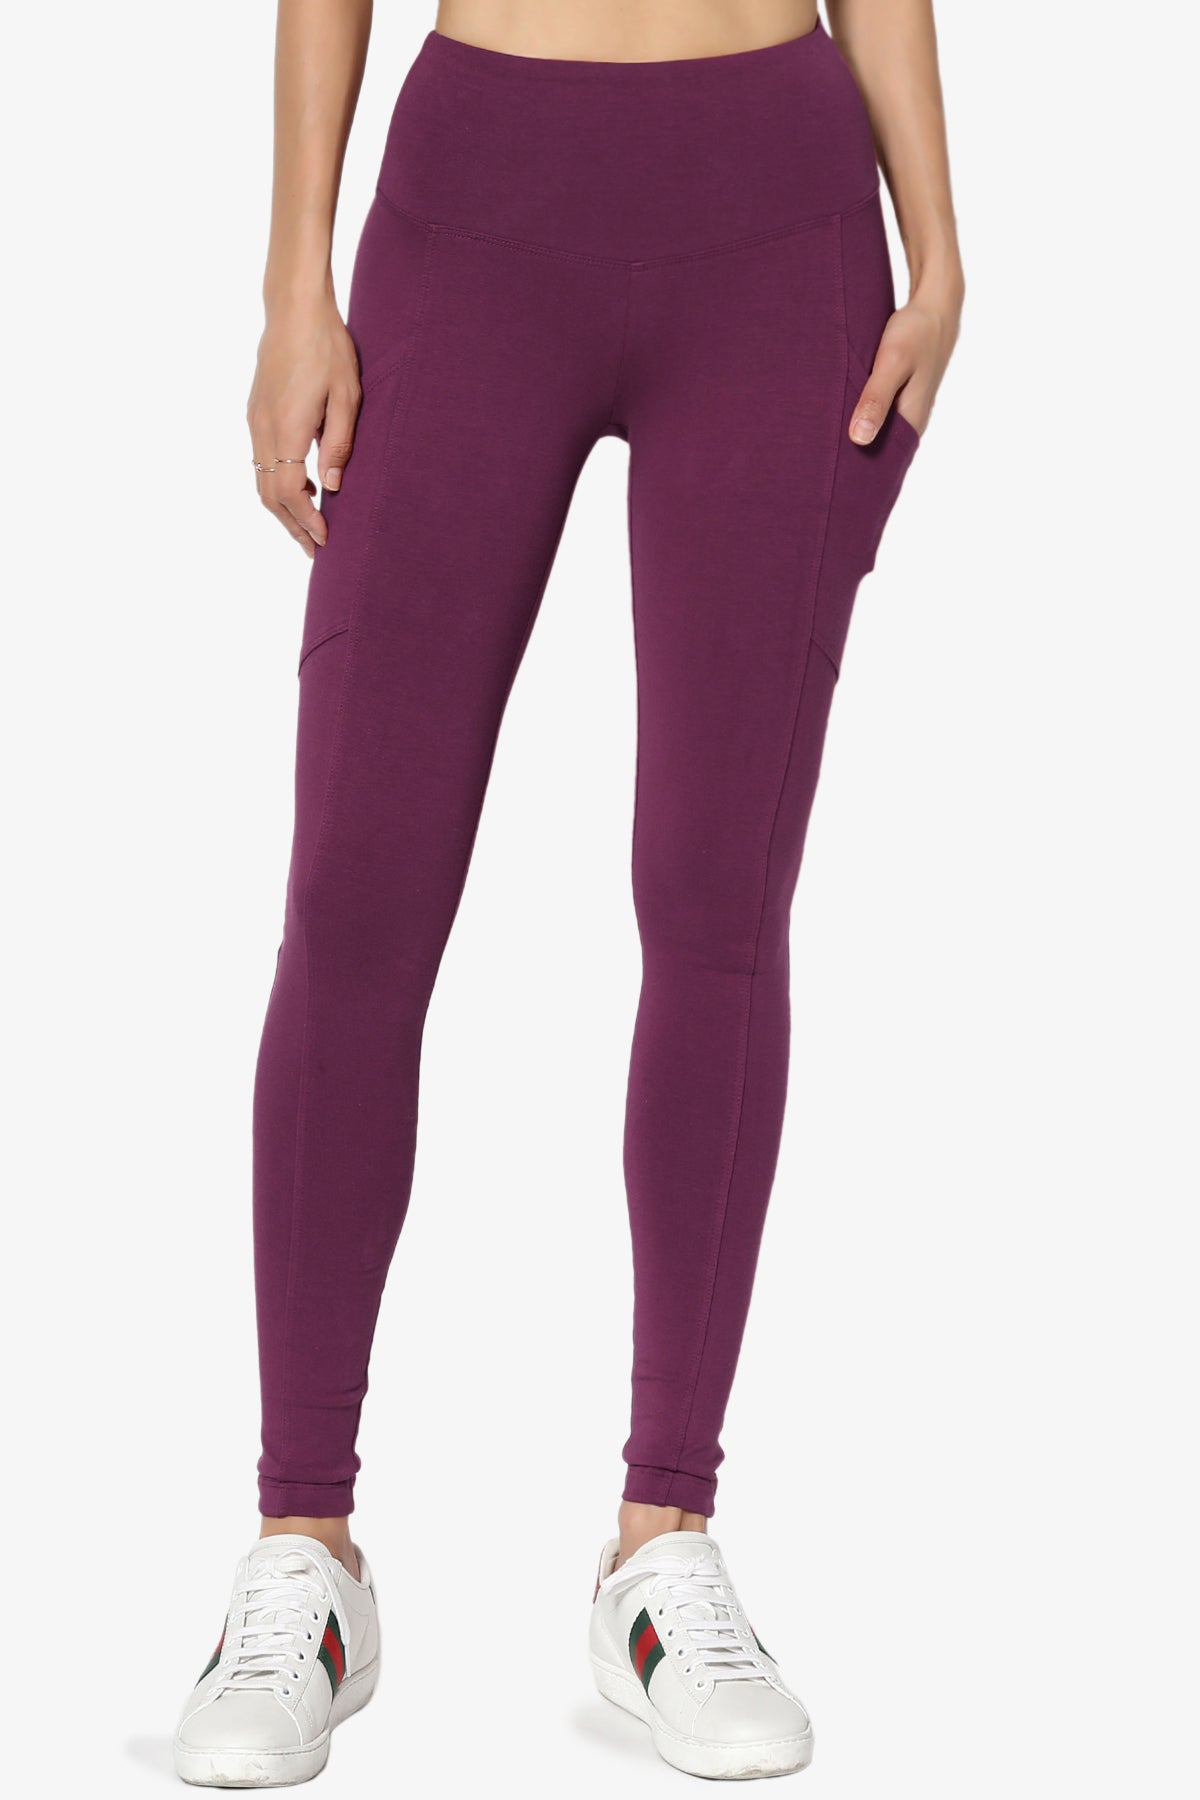 Load image into Gallery viewer, Ansley Luxe Cotton Leggings with Pockets DARK PLUM_3
